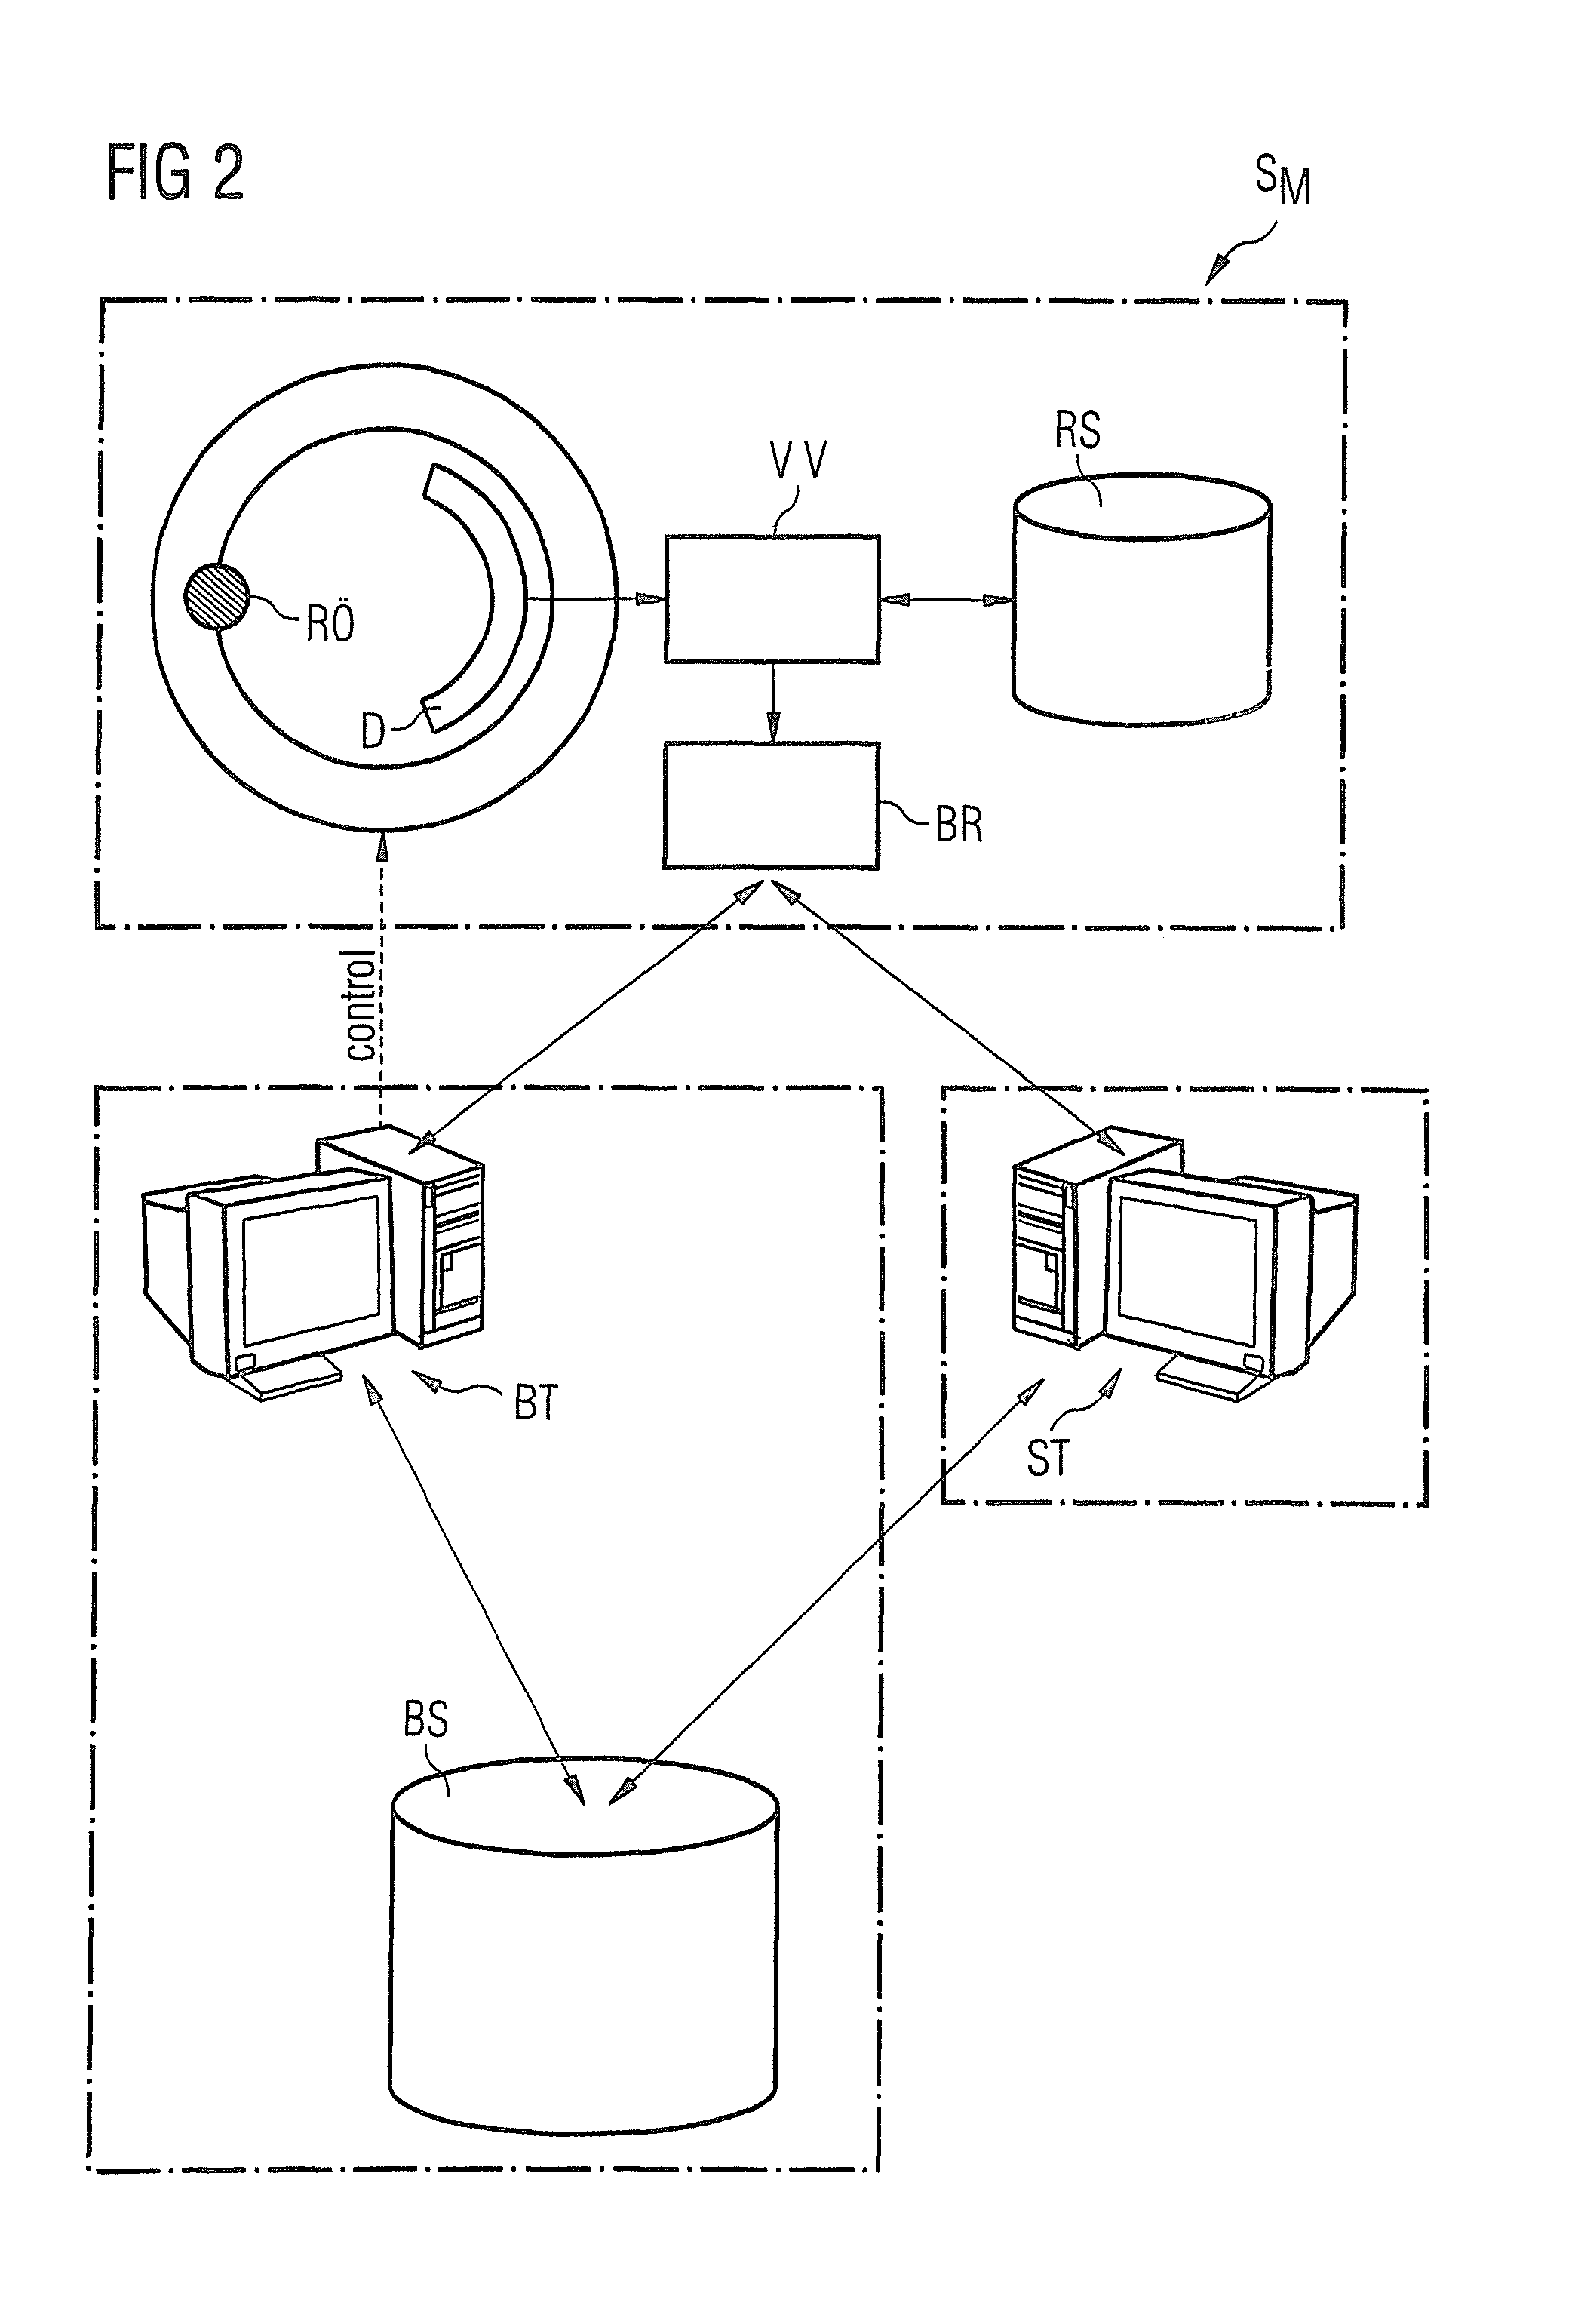 Method for testing and controlling workflows in a clinical system and/or components thereof